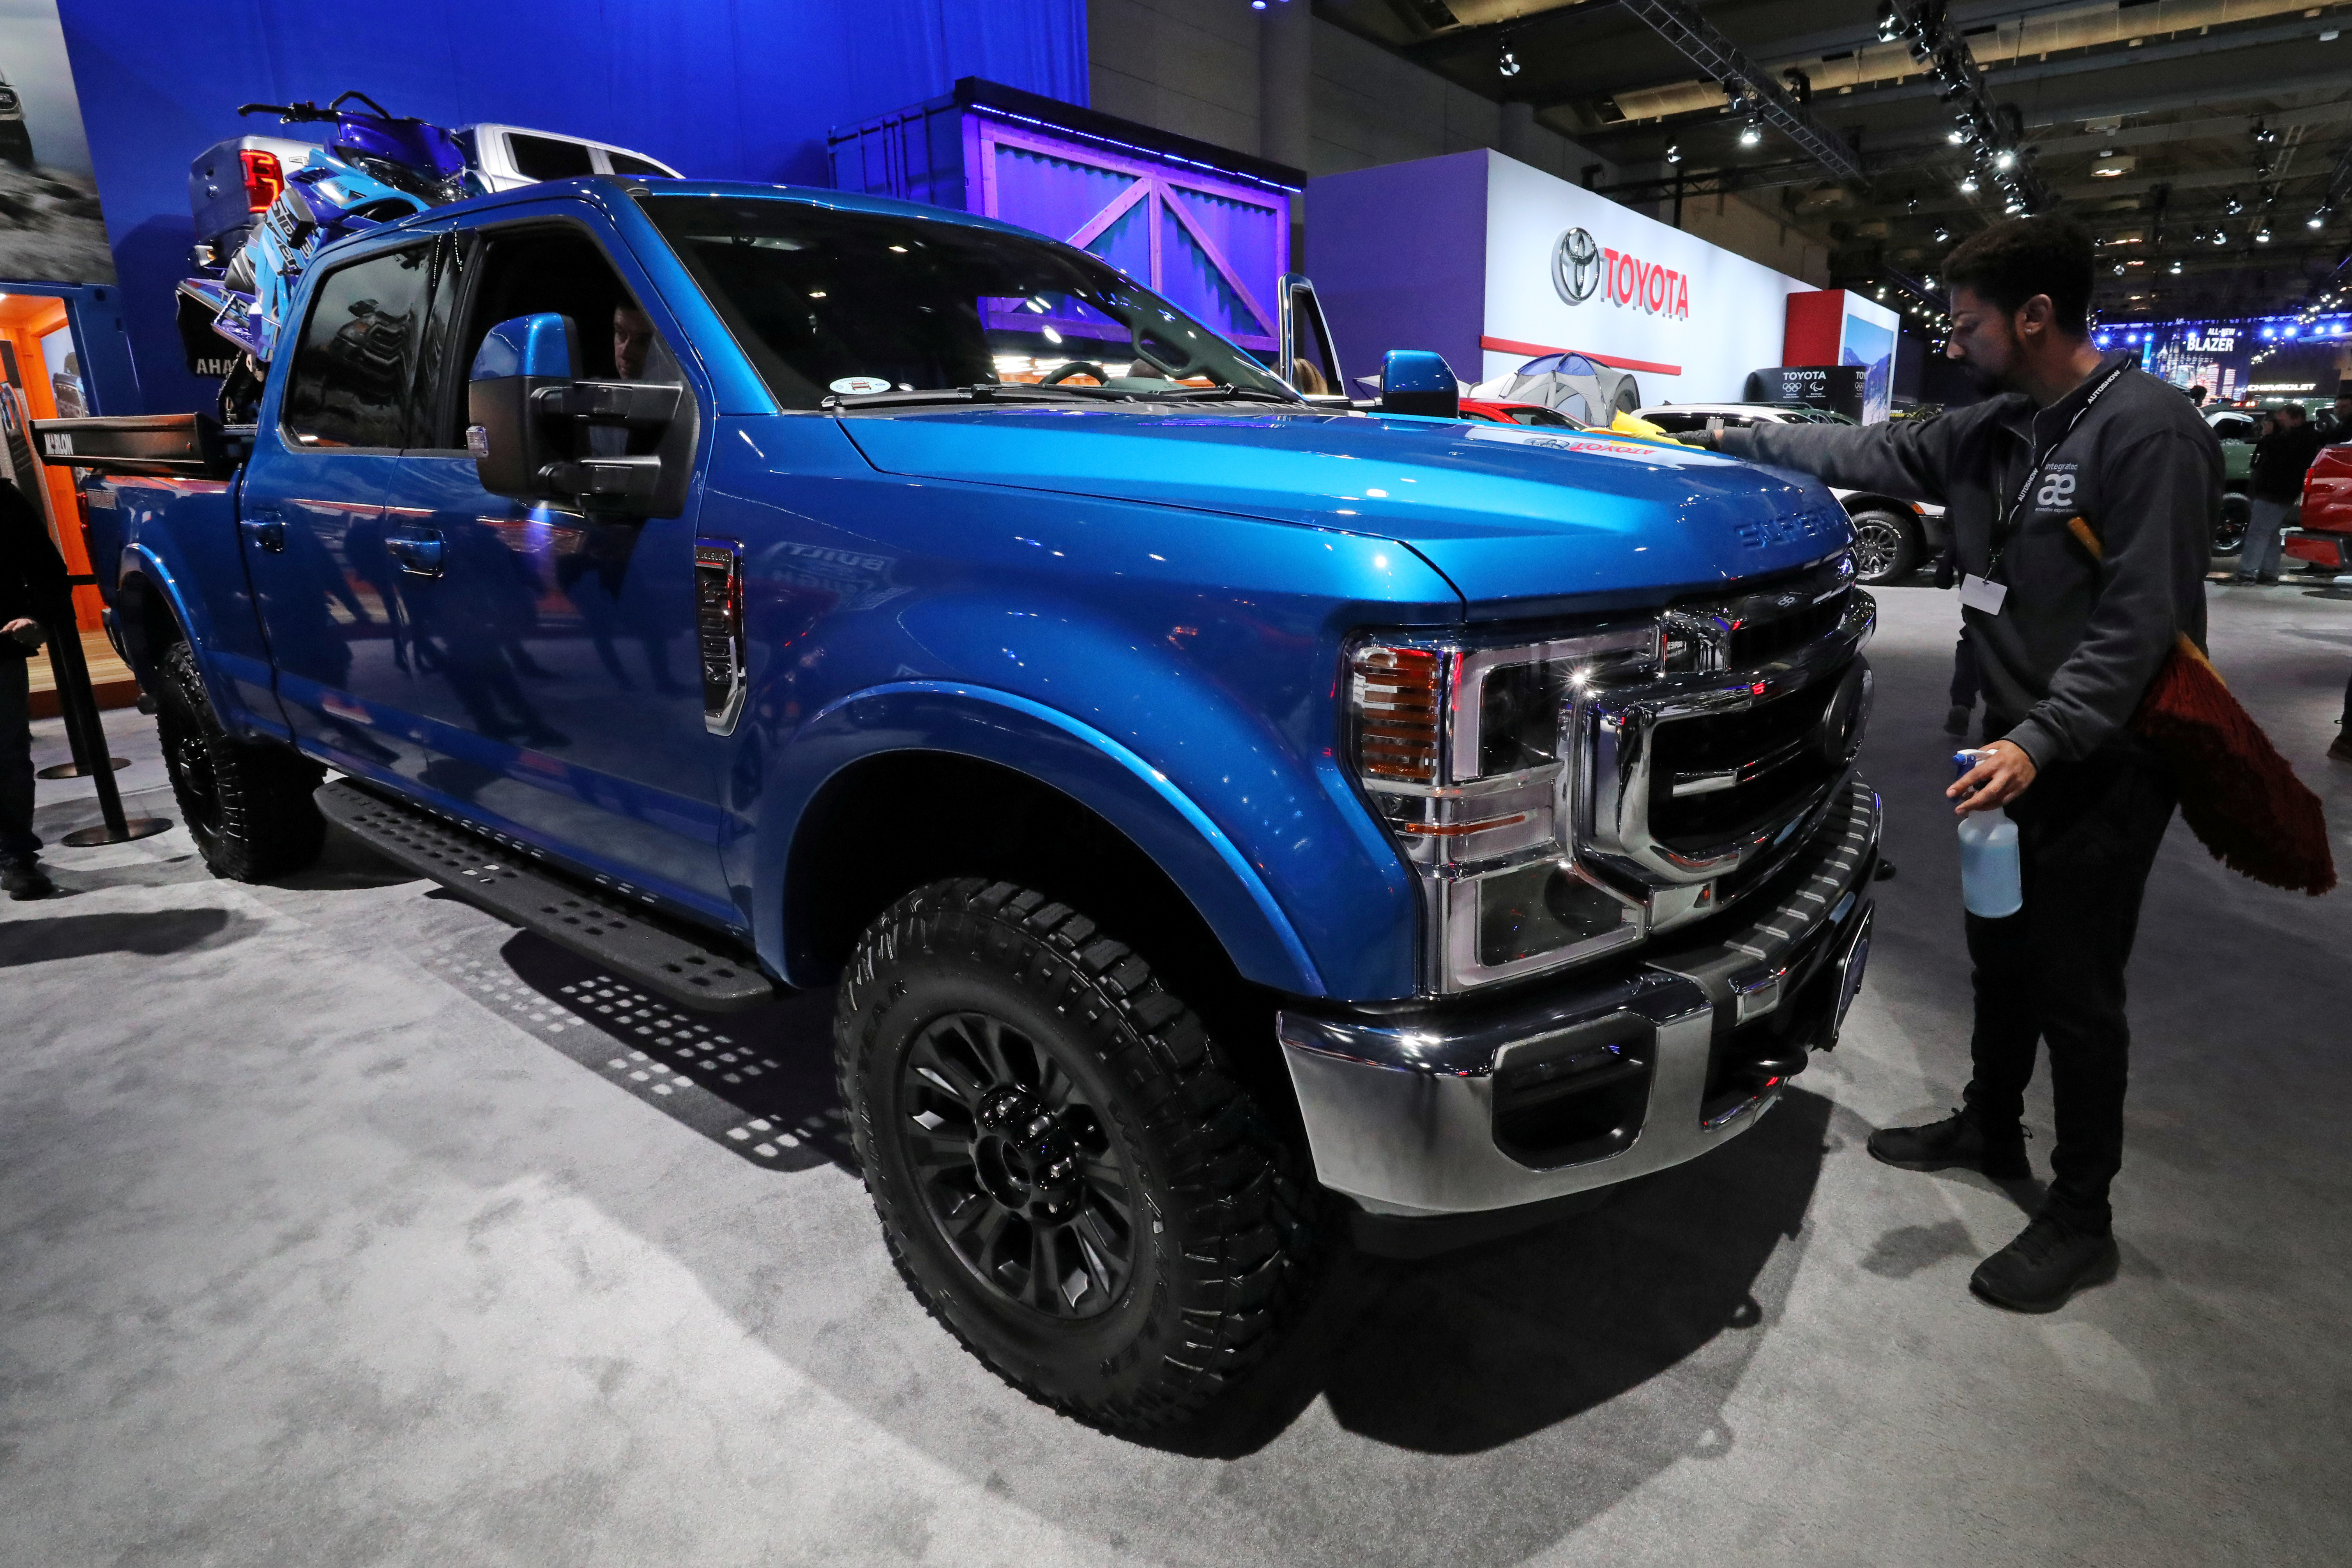 A worker polishes a Ford Super Duty F350 4X4 truck at the Canadian International Auto Show in Toronto